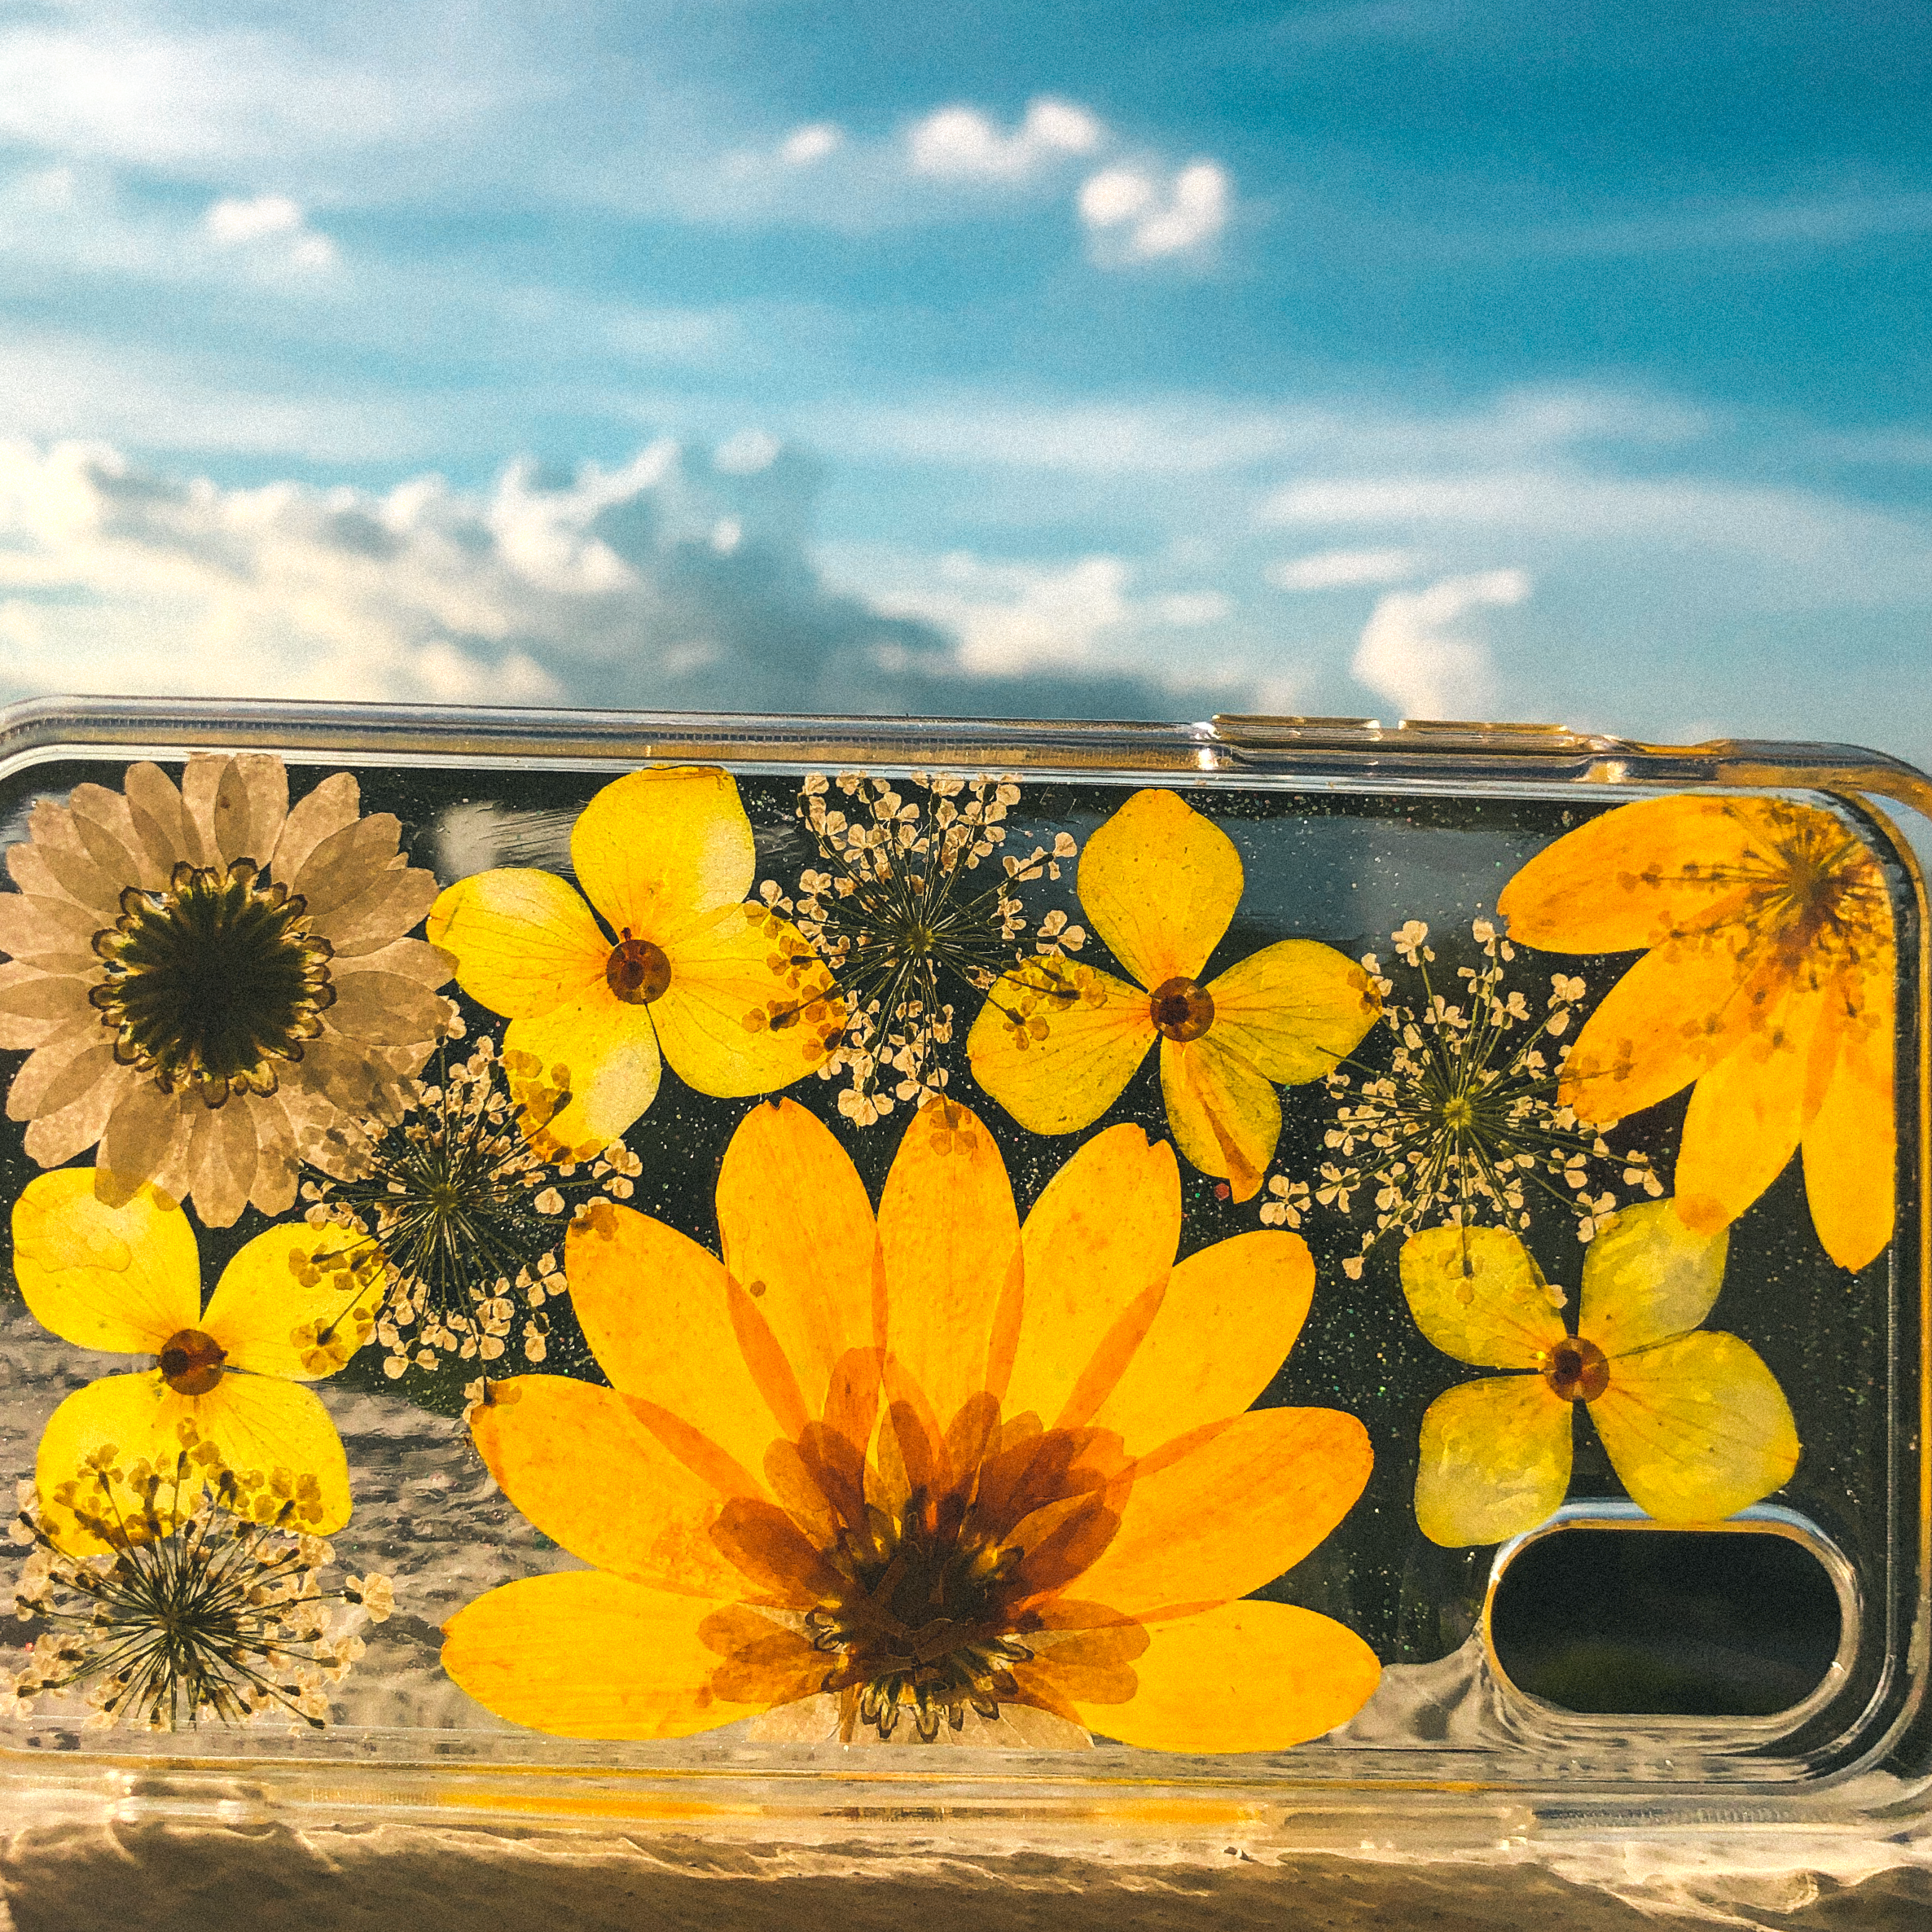 Pressed WildFlower Phone Case (iPhone X/XS)  by Veronique